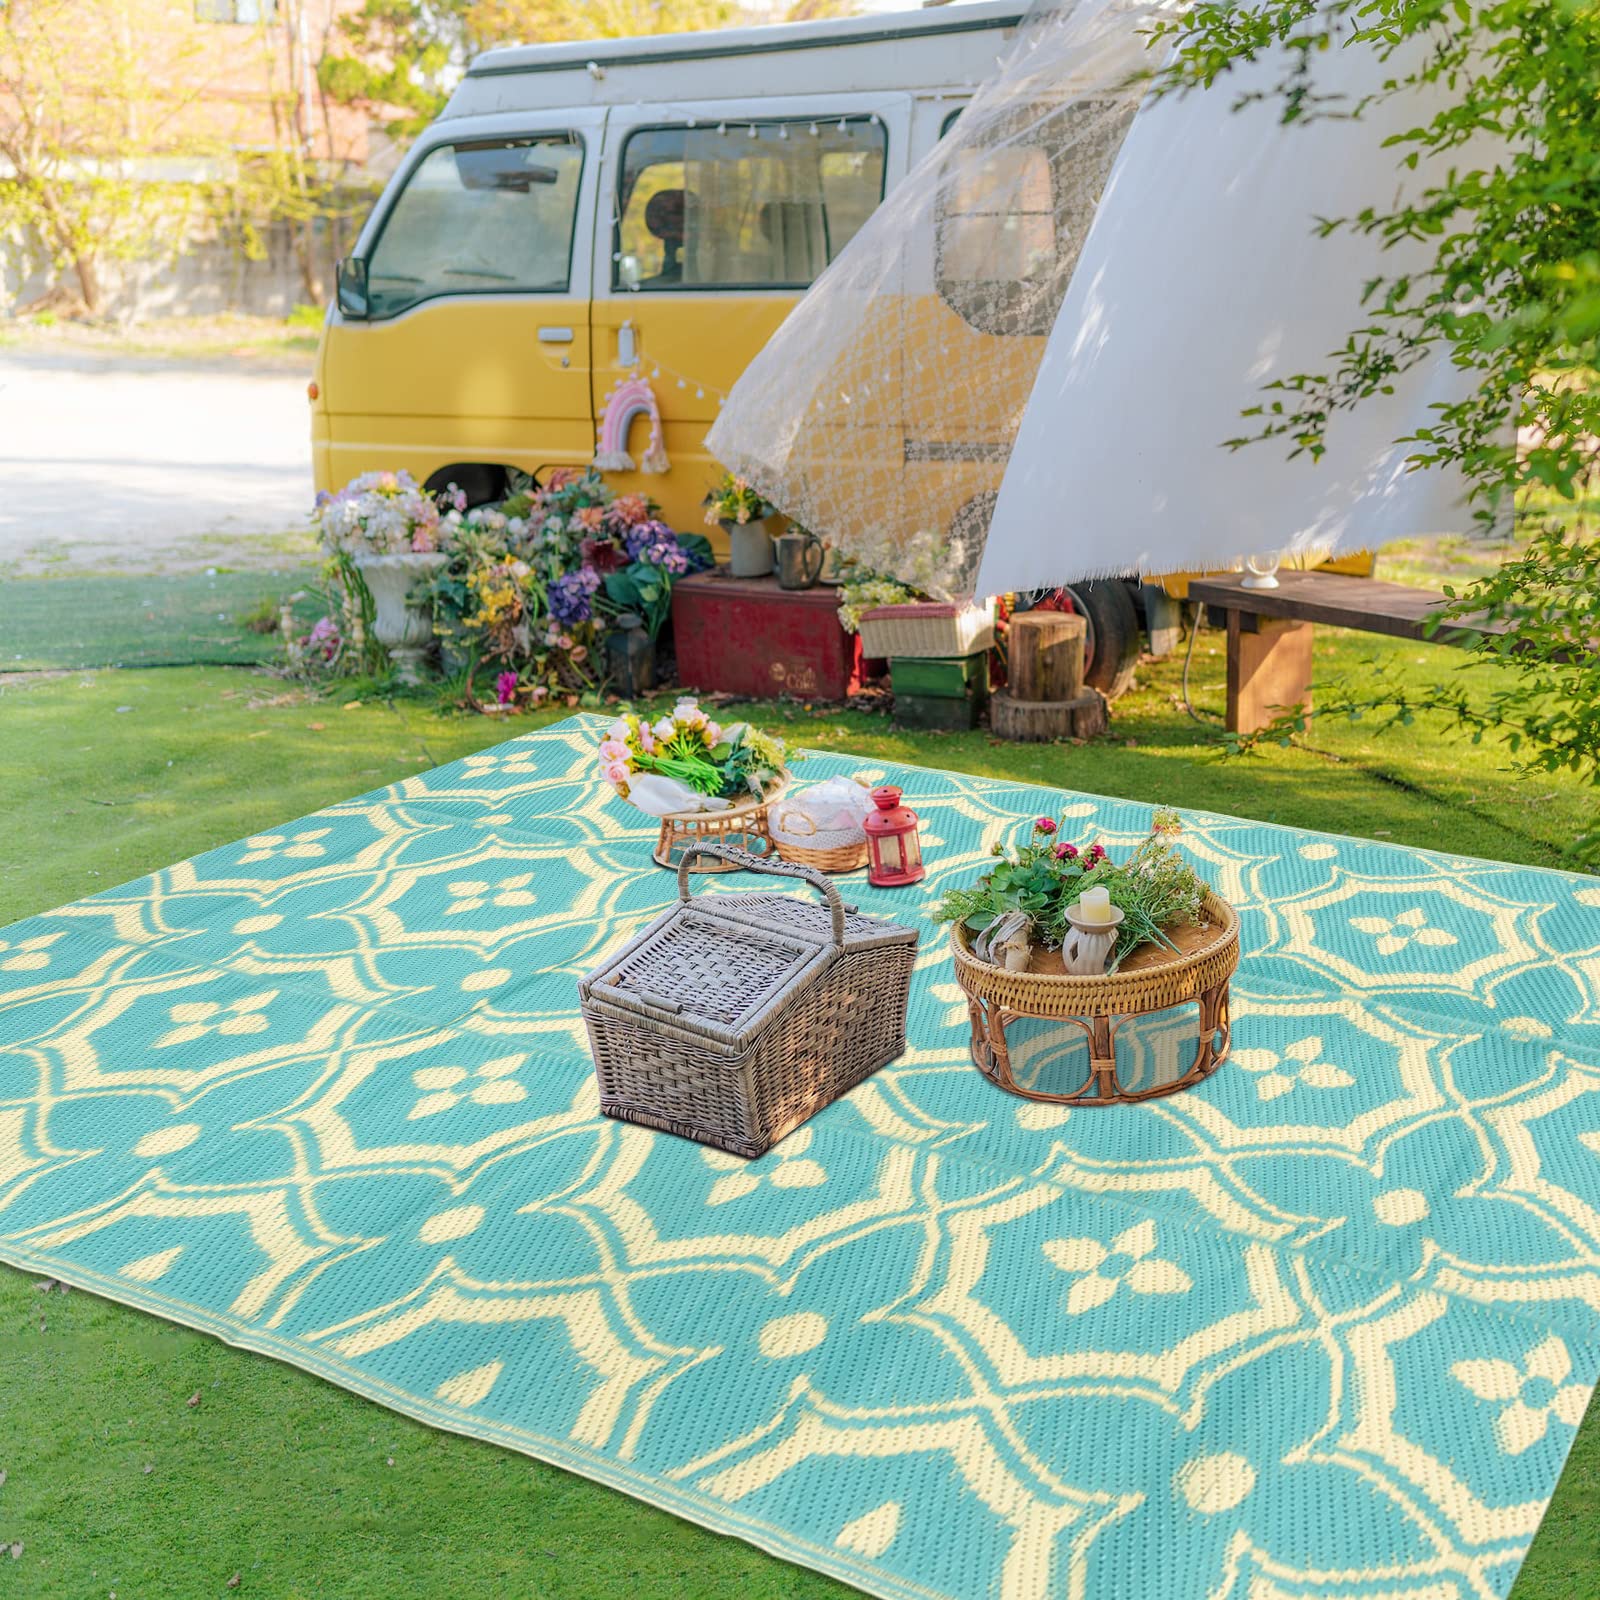 Reversible Outdoor Rugs for Patio Clearance 4x6Ft Waterproof Large Plastic Straw Area Rug Nonslip Portable Carpet Floor Mats for RV Camping Deck Picnic Beach Backyard Outside Decor Indoor Rug